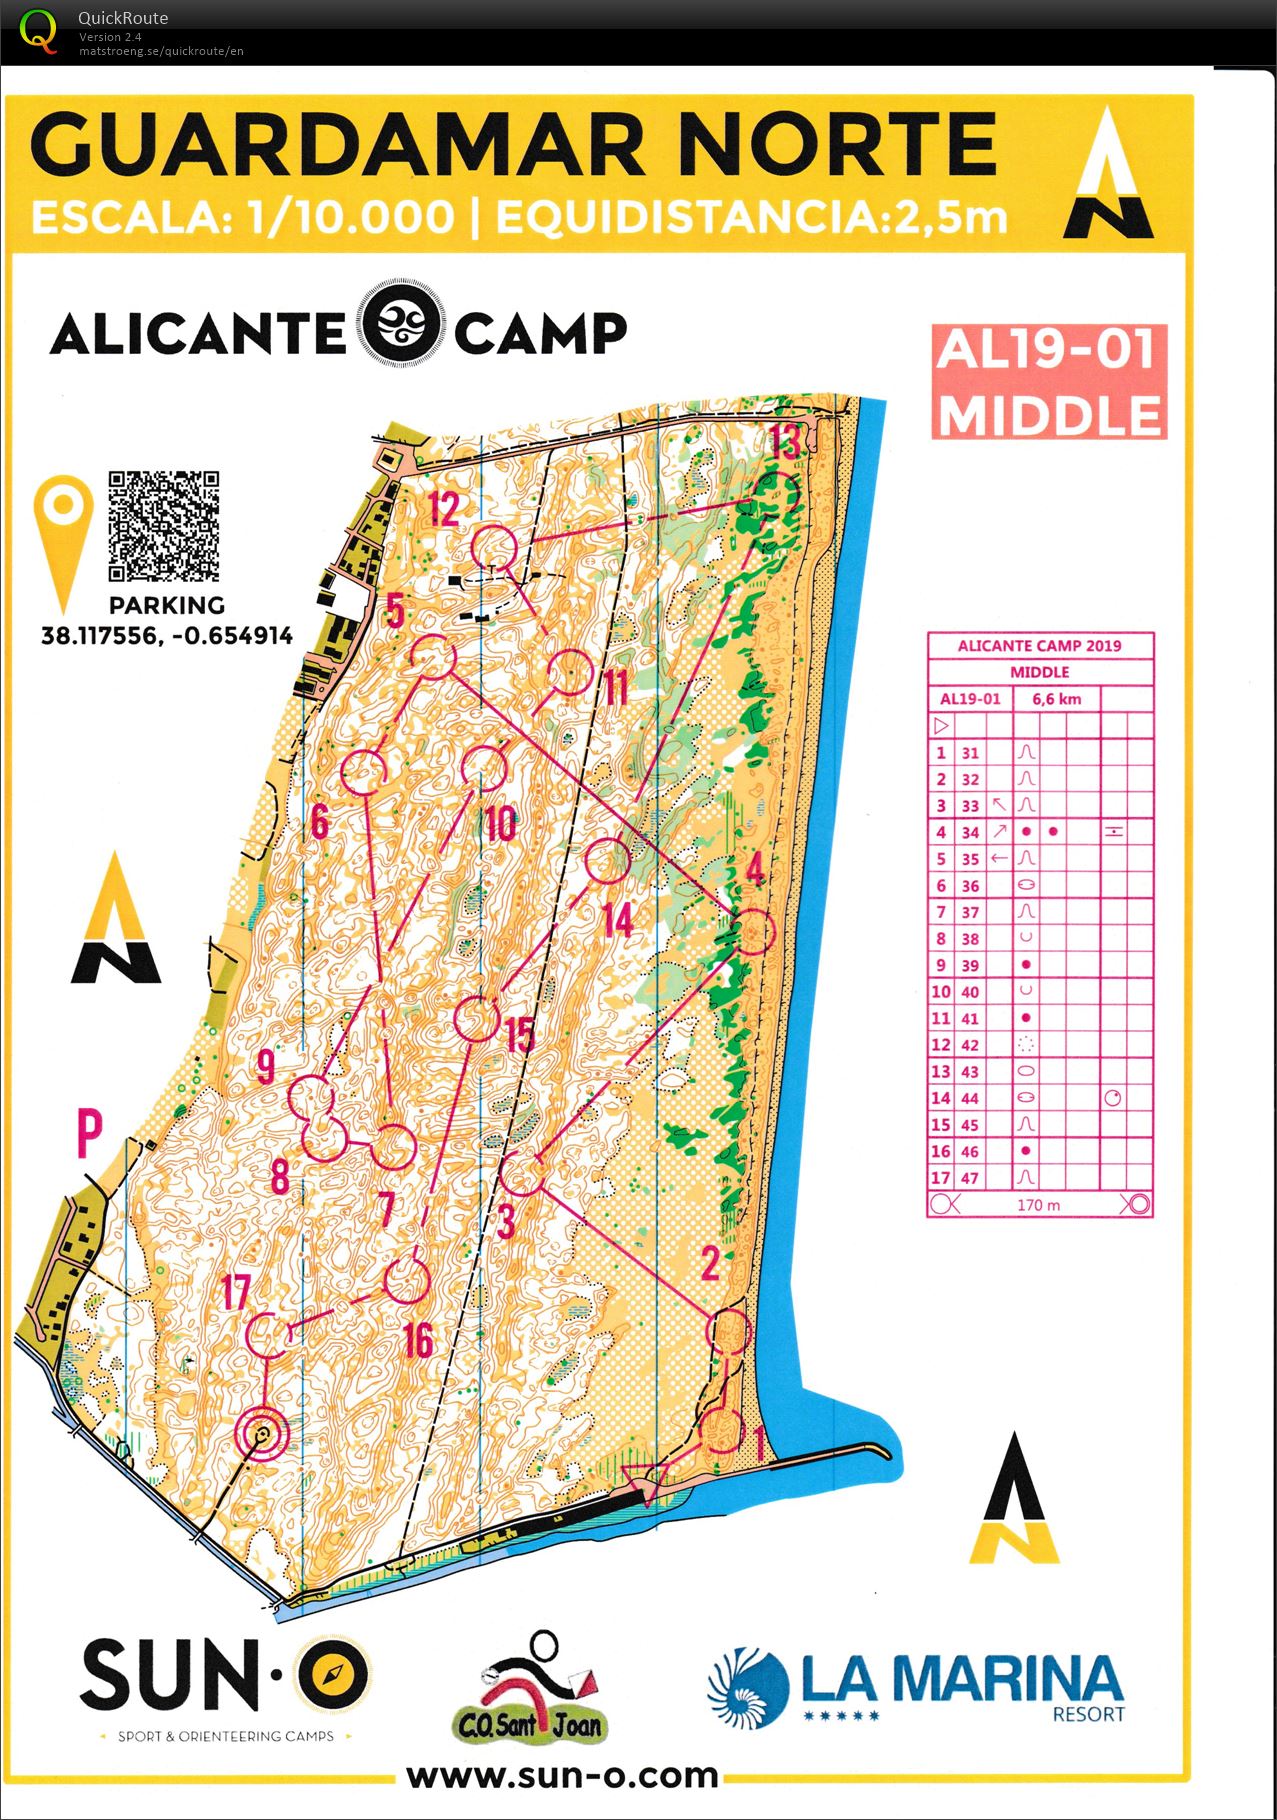 TC Alicante #7, middle rychle (23/01/2019)